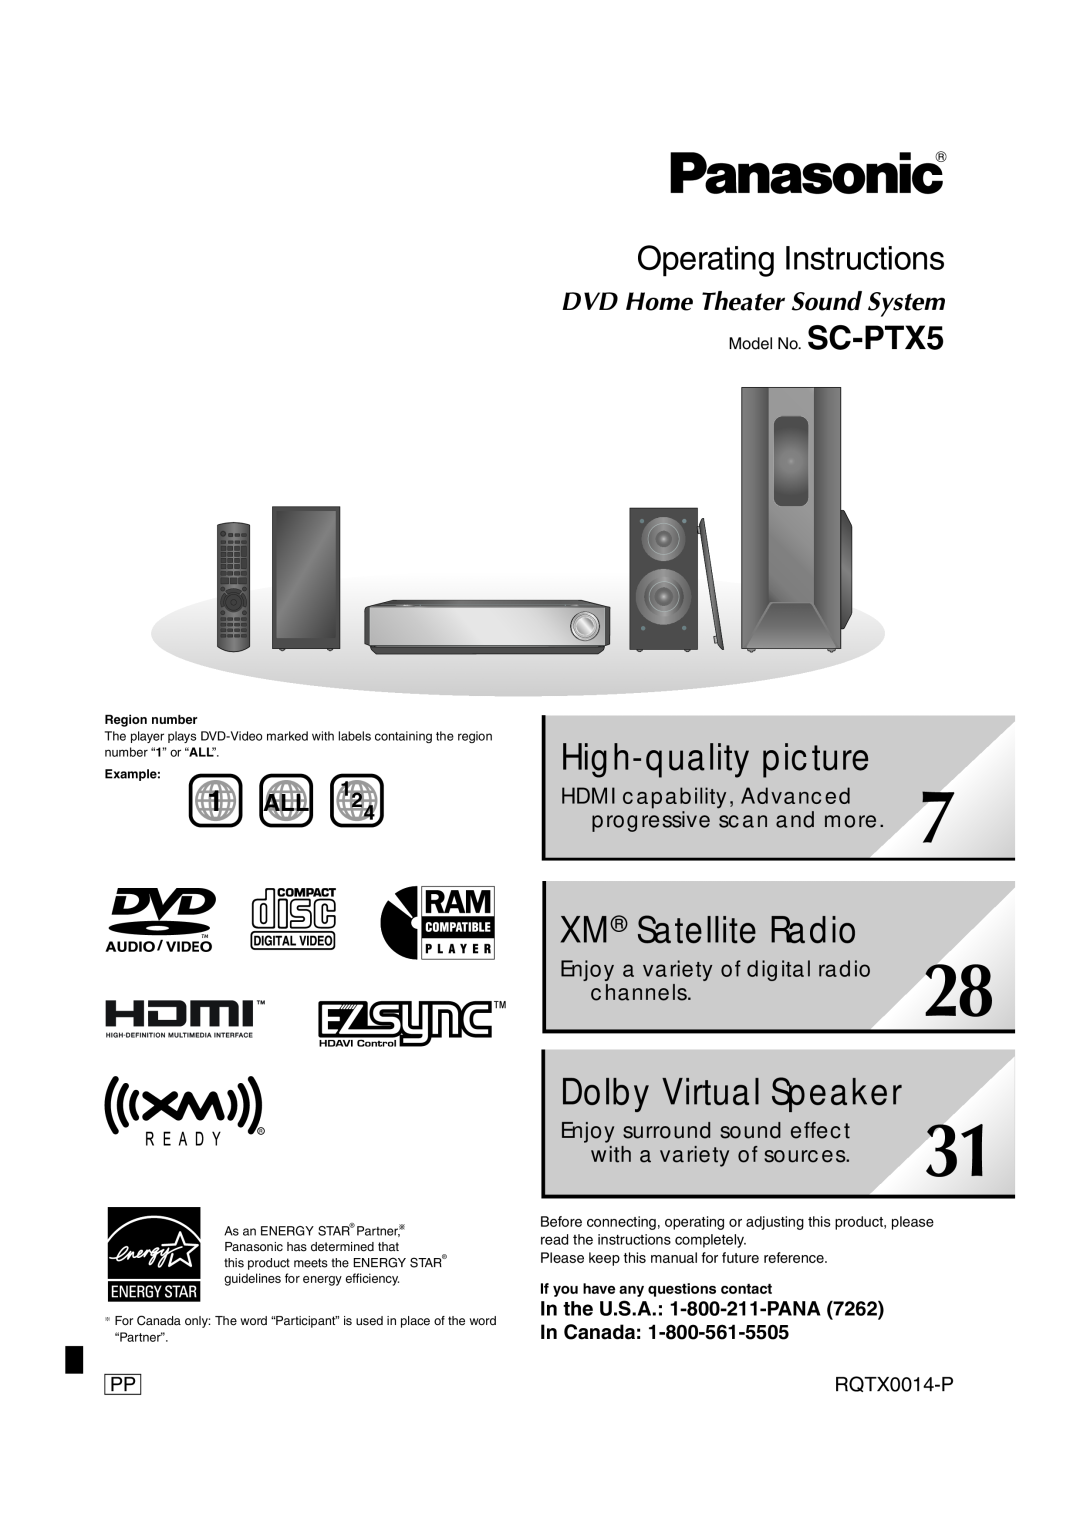 Panasonic SC-PTX5 manual High-qualitypicture, XM Satellite Radio, Dolby Virtual Speaker, Operating Instructions, 1 ALL 